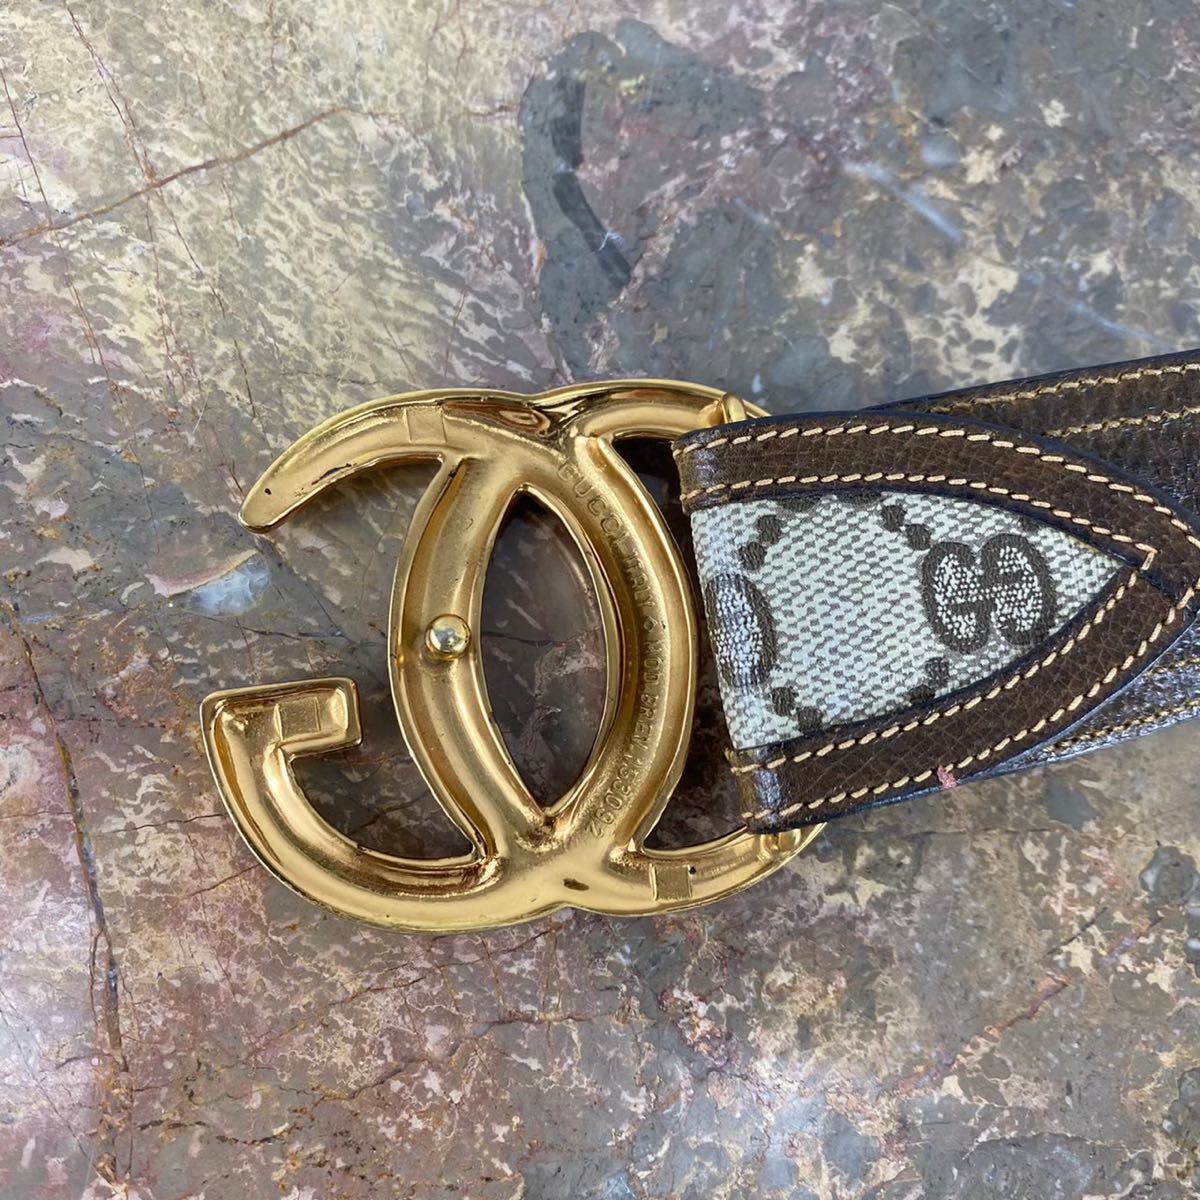 OLD GUCCI GG PATTERNED LOGO BUCKLE BELT MADE IN ITALY/オールドグッチGG柄ロゴバックルベルト_画像3